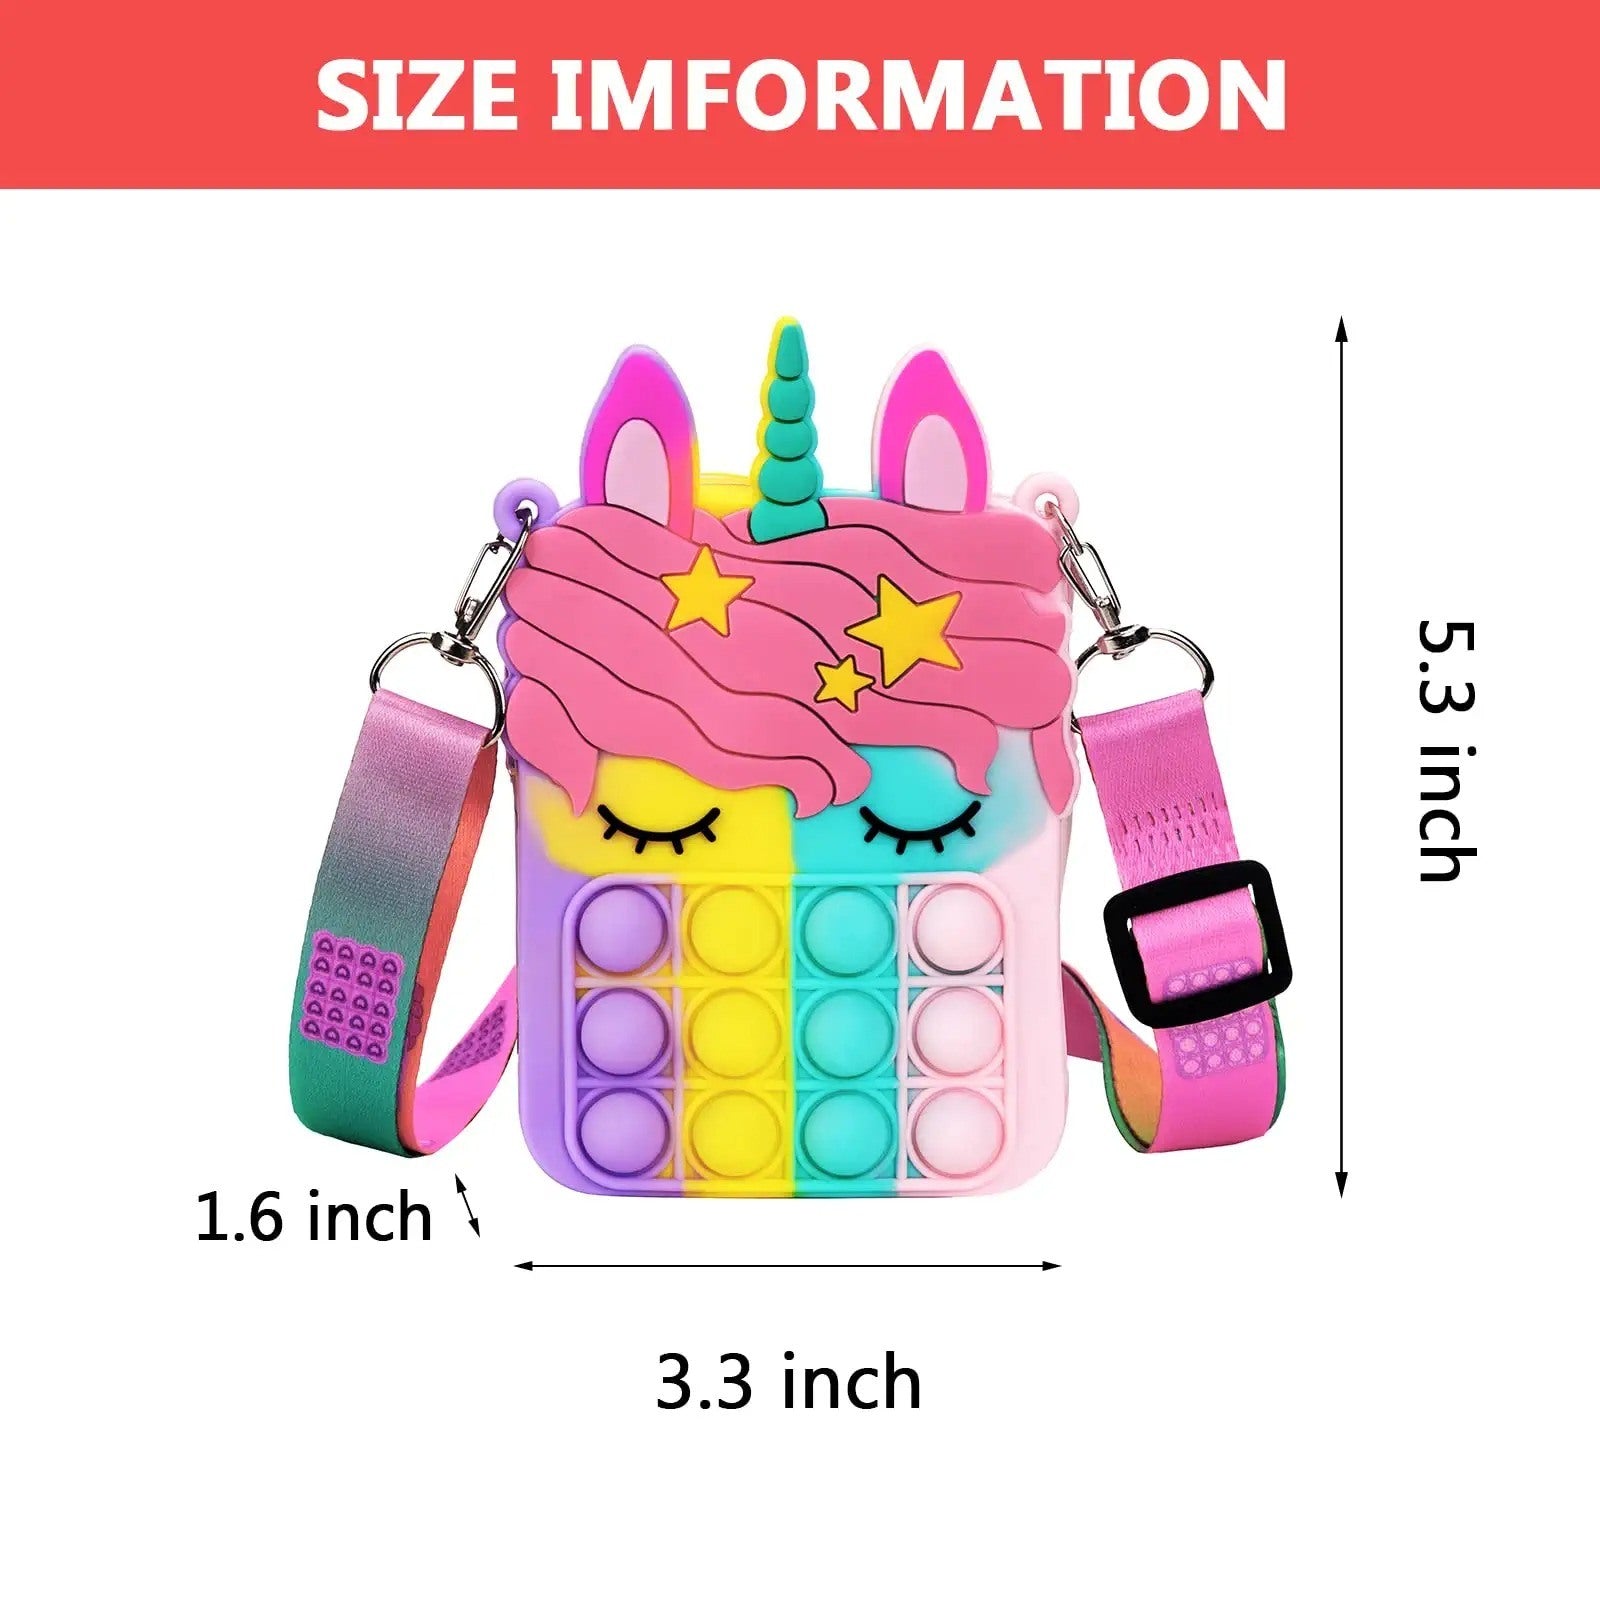 Colorful Girl And Women's Unicorn Pop Purse Pop Bag with adjustable pink strap and matching watch, isolated on a white background. Details include a vibrant design appealing to kids and adults alike.